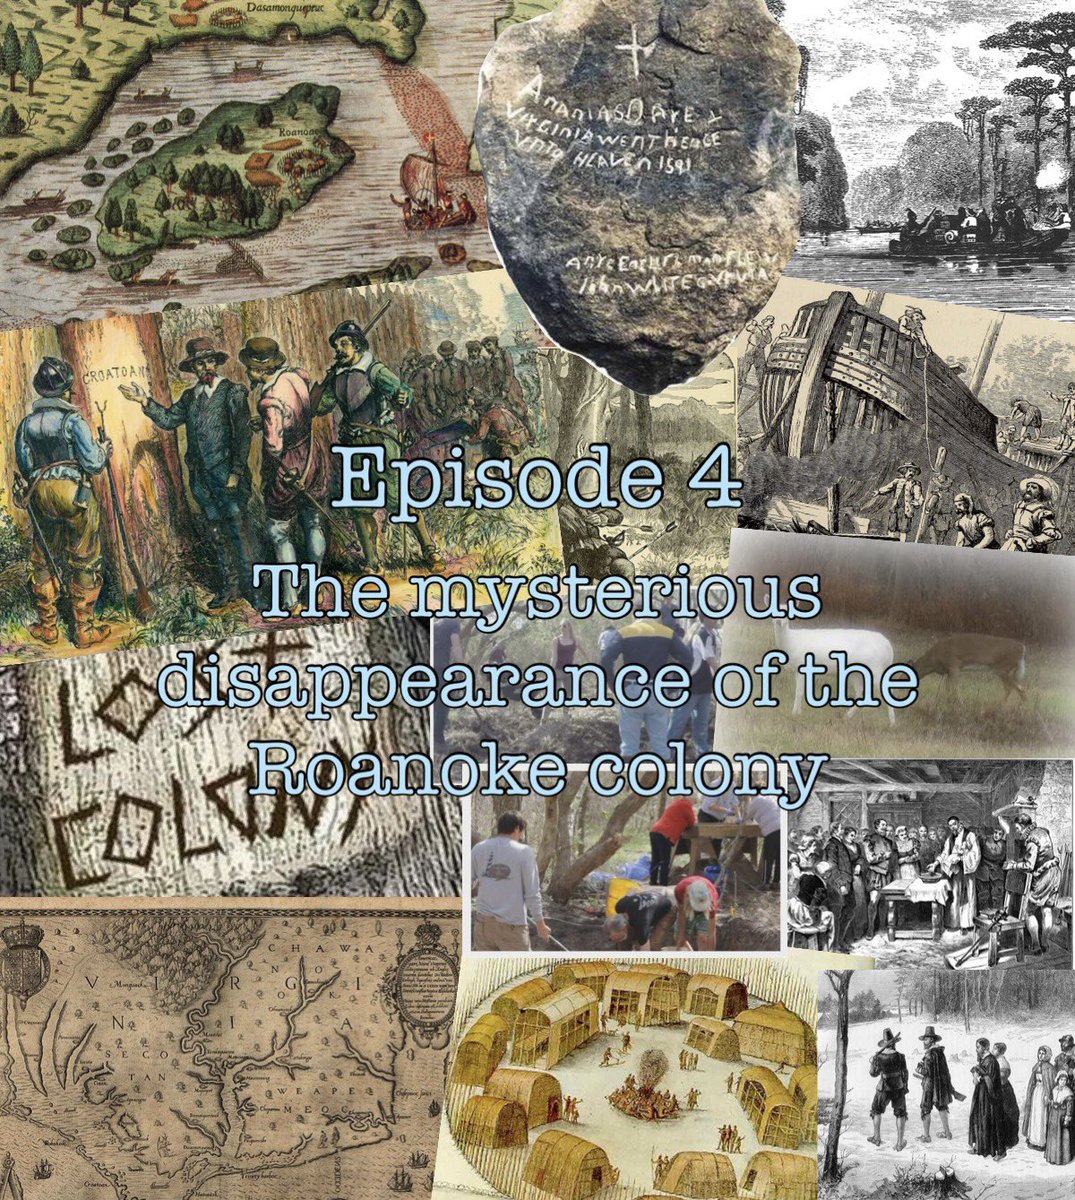 Episode 4 is out! What happened to the Roanoke colony back in the 1500s?? #roanokecolony #unsolvedmysteries #16thcentury #conspiracy #conspiracytheory #conspiracypodcast #unsolvedmysteriespodcast #truecrime #truecrimecommunity #truecrimepodcast #discoverunder5k #discoverunder1k